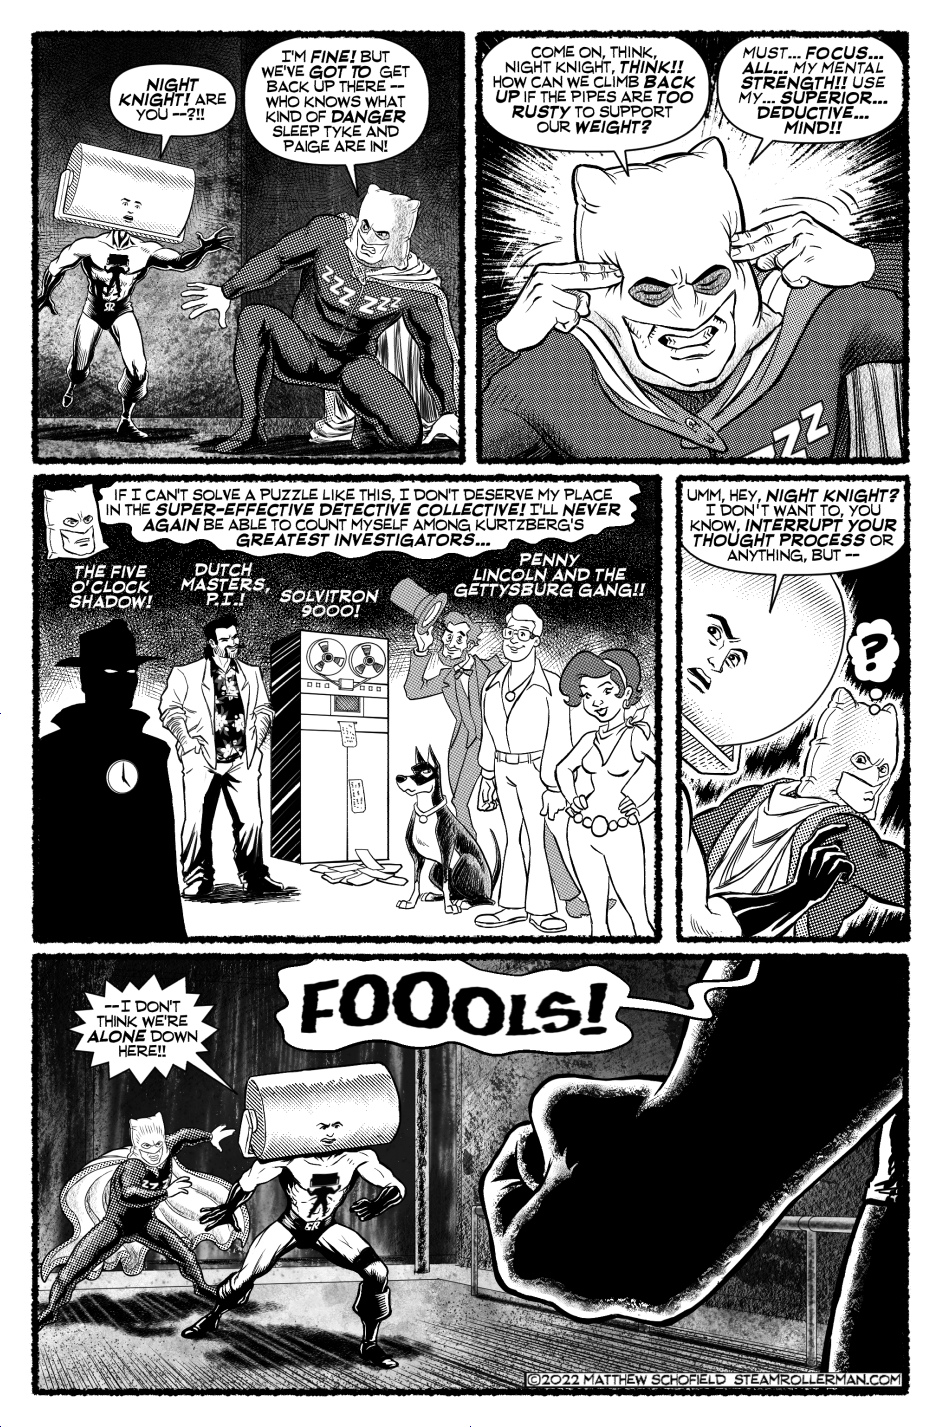 Issue Three, Page Five